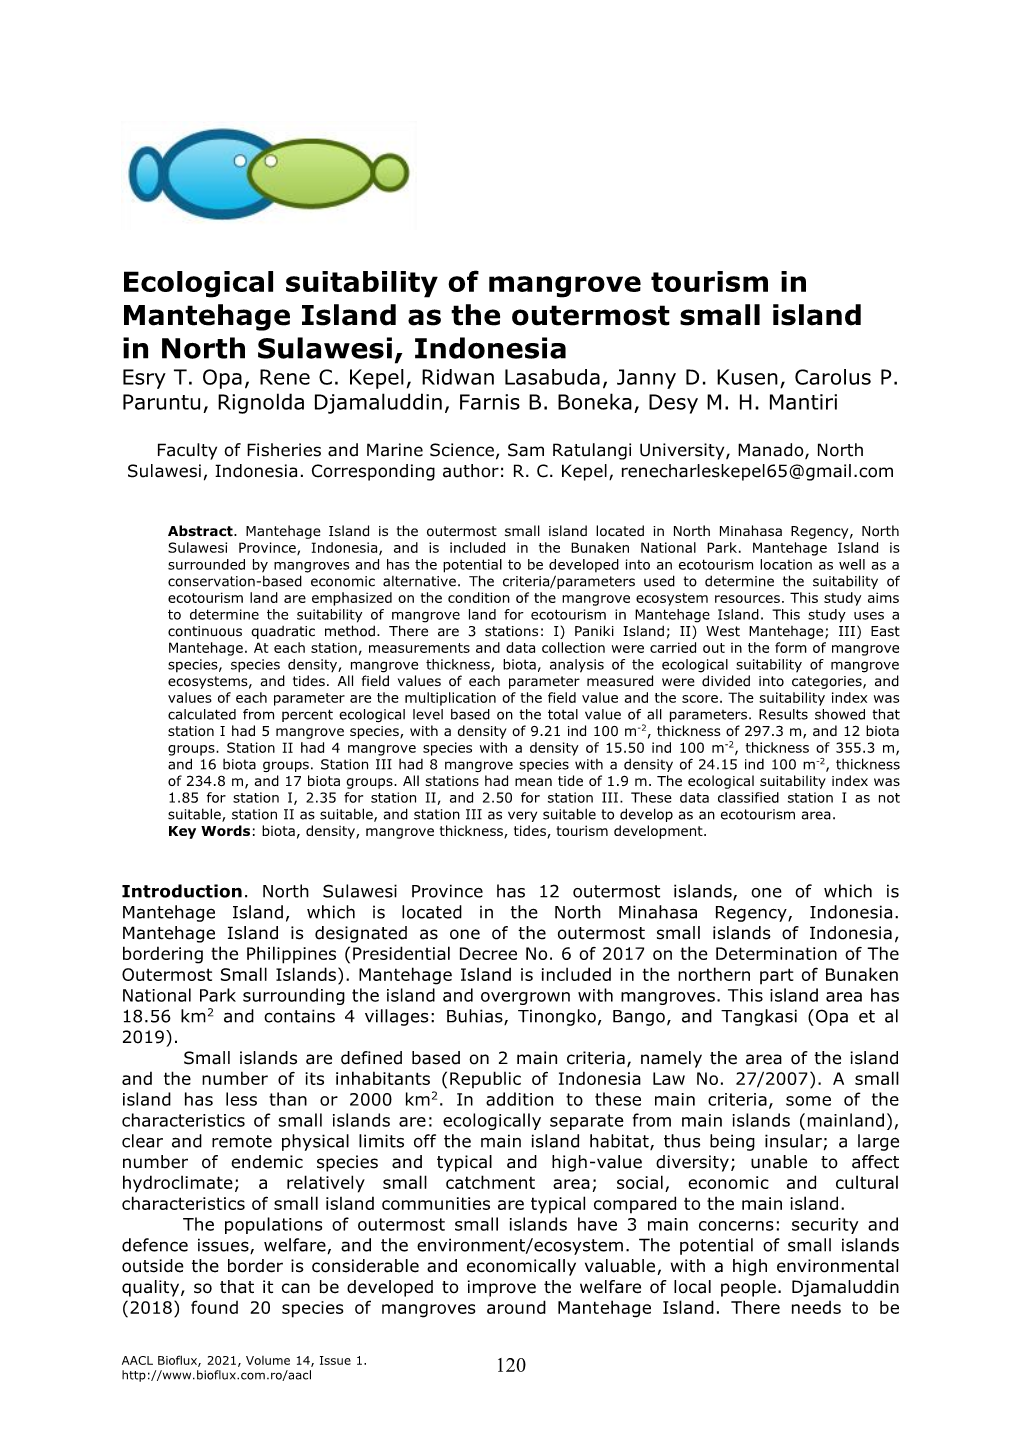 Ecological Suitability of Mangrove Tourism in Mantehage Island As the Outermost Small Island in North Sulawesi, Indonesia Esry T